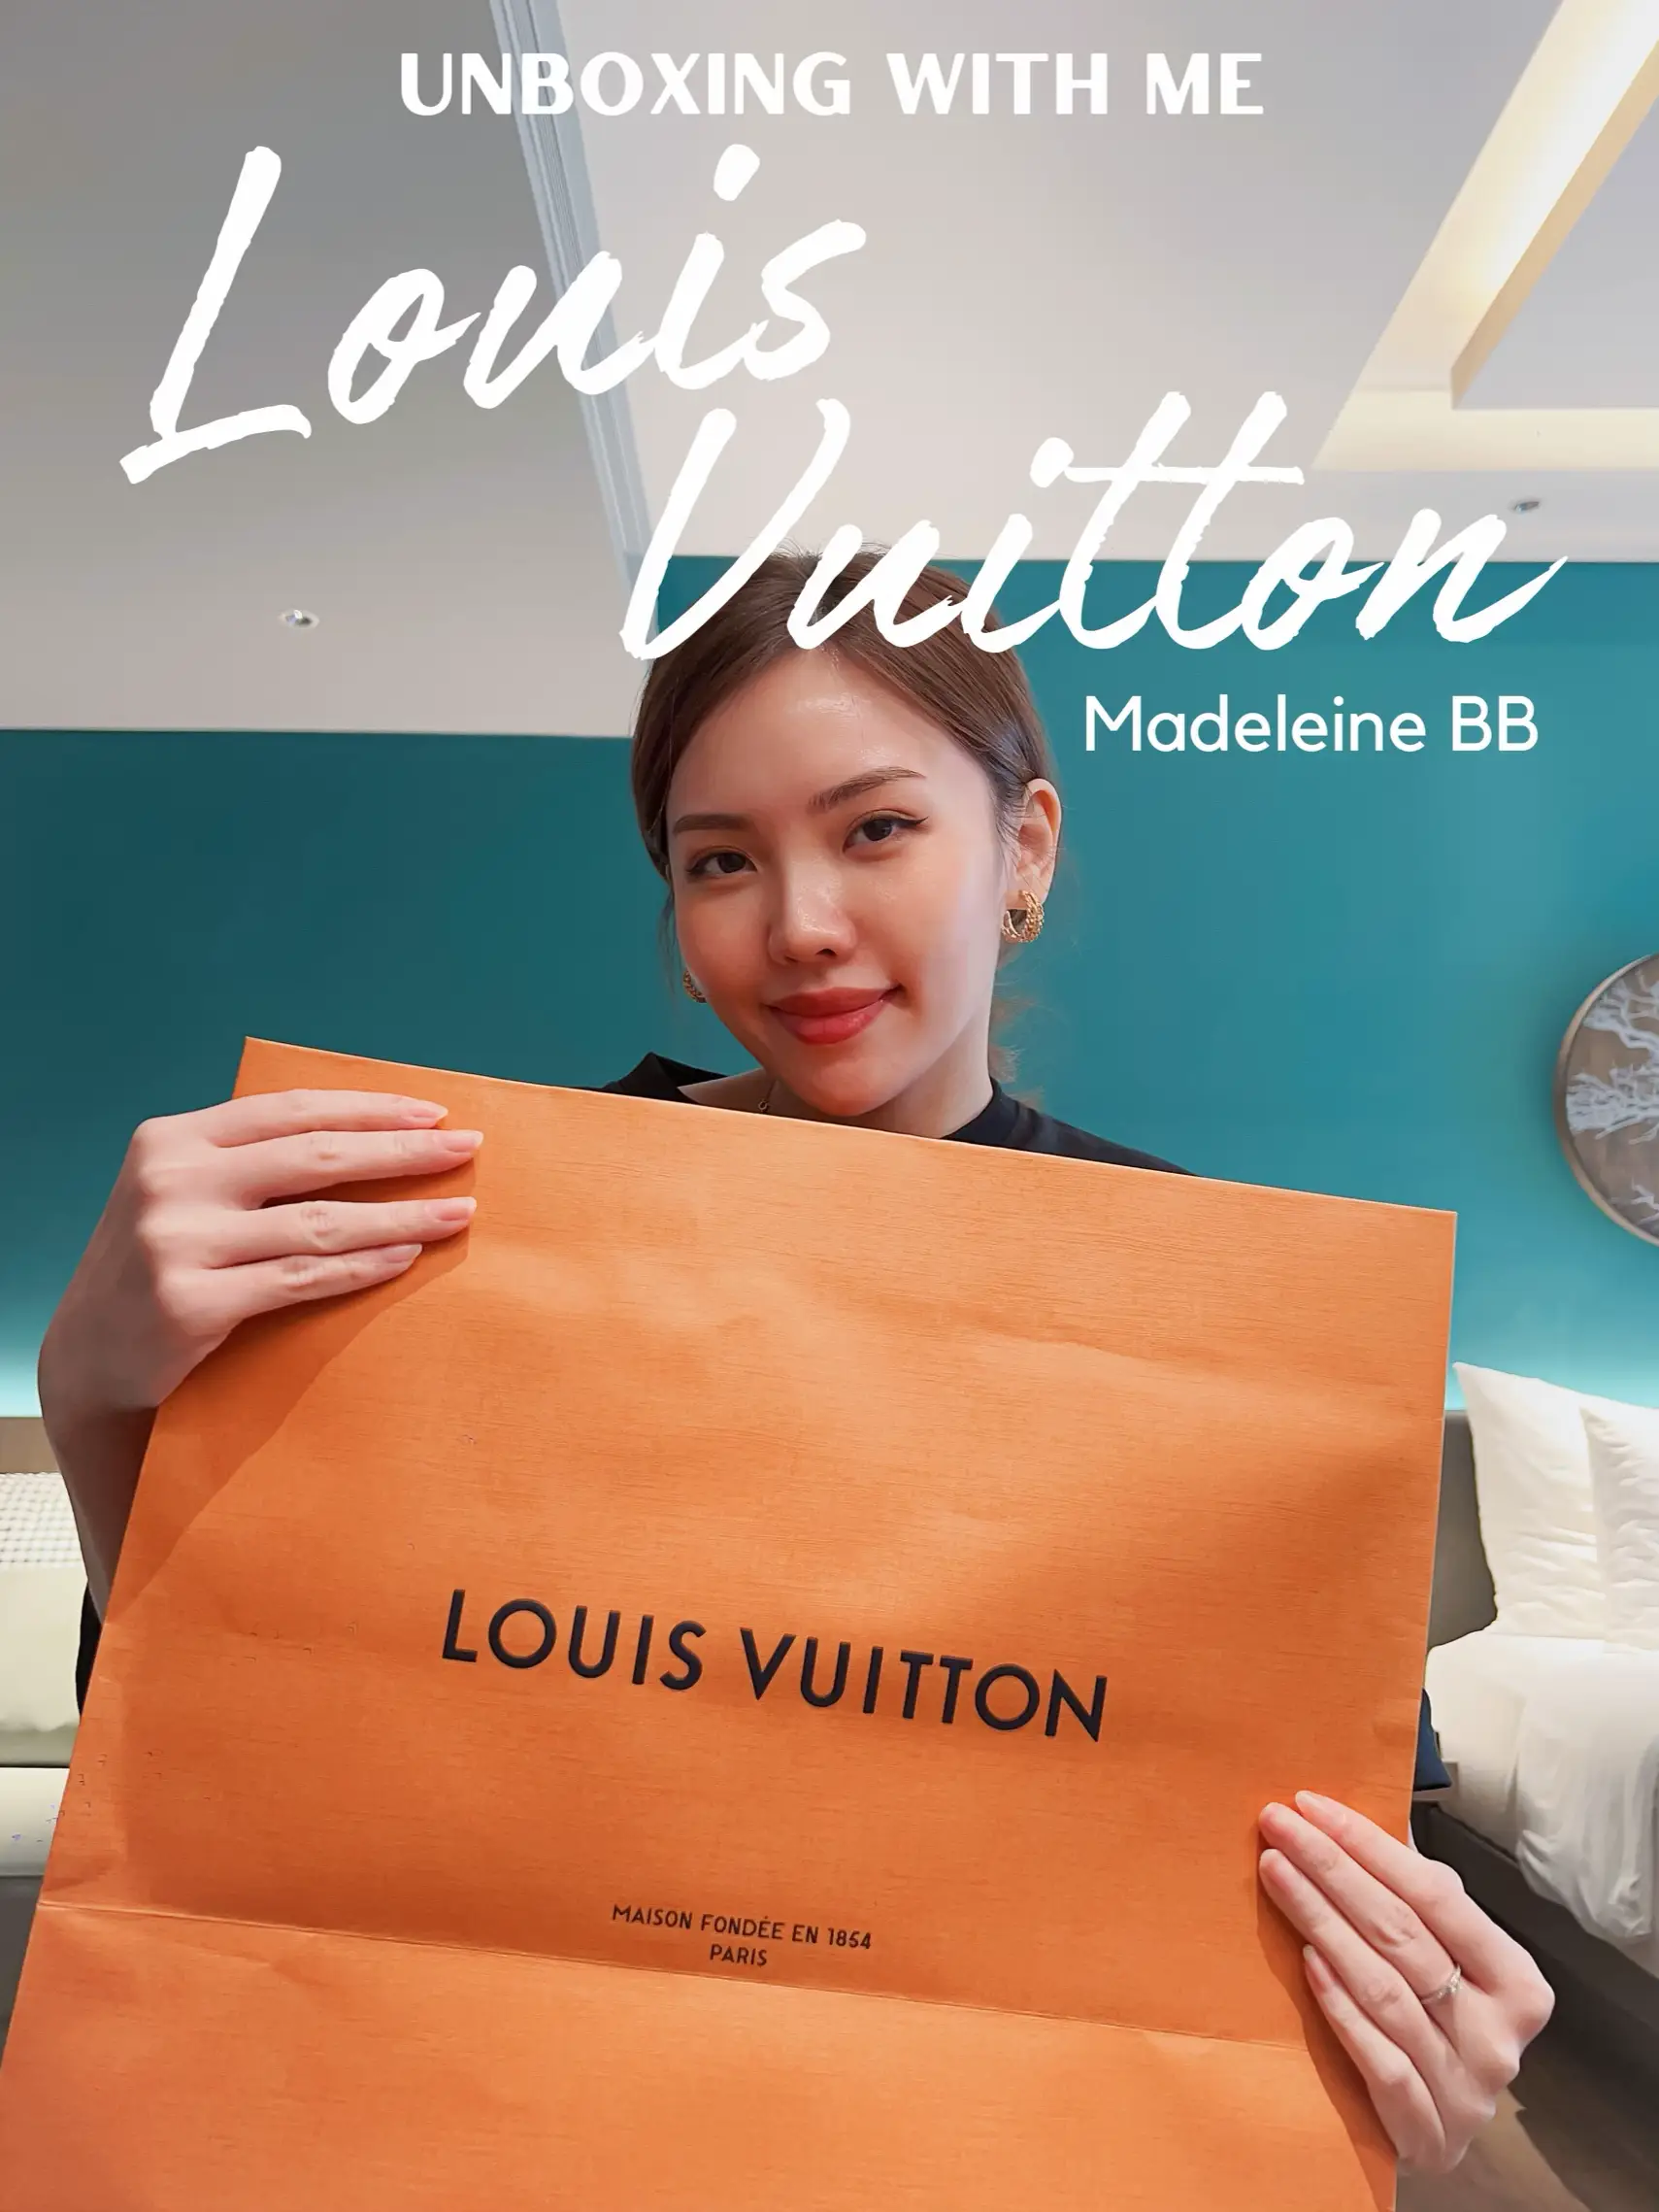 Unboxing LV Madeleine BB with Me! 😍